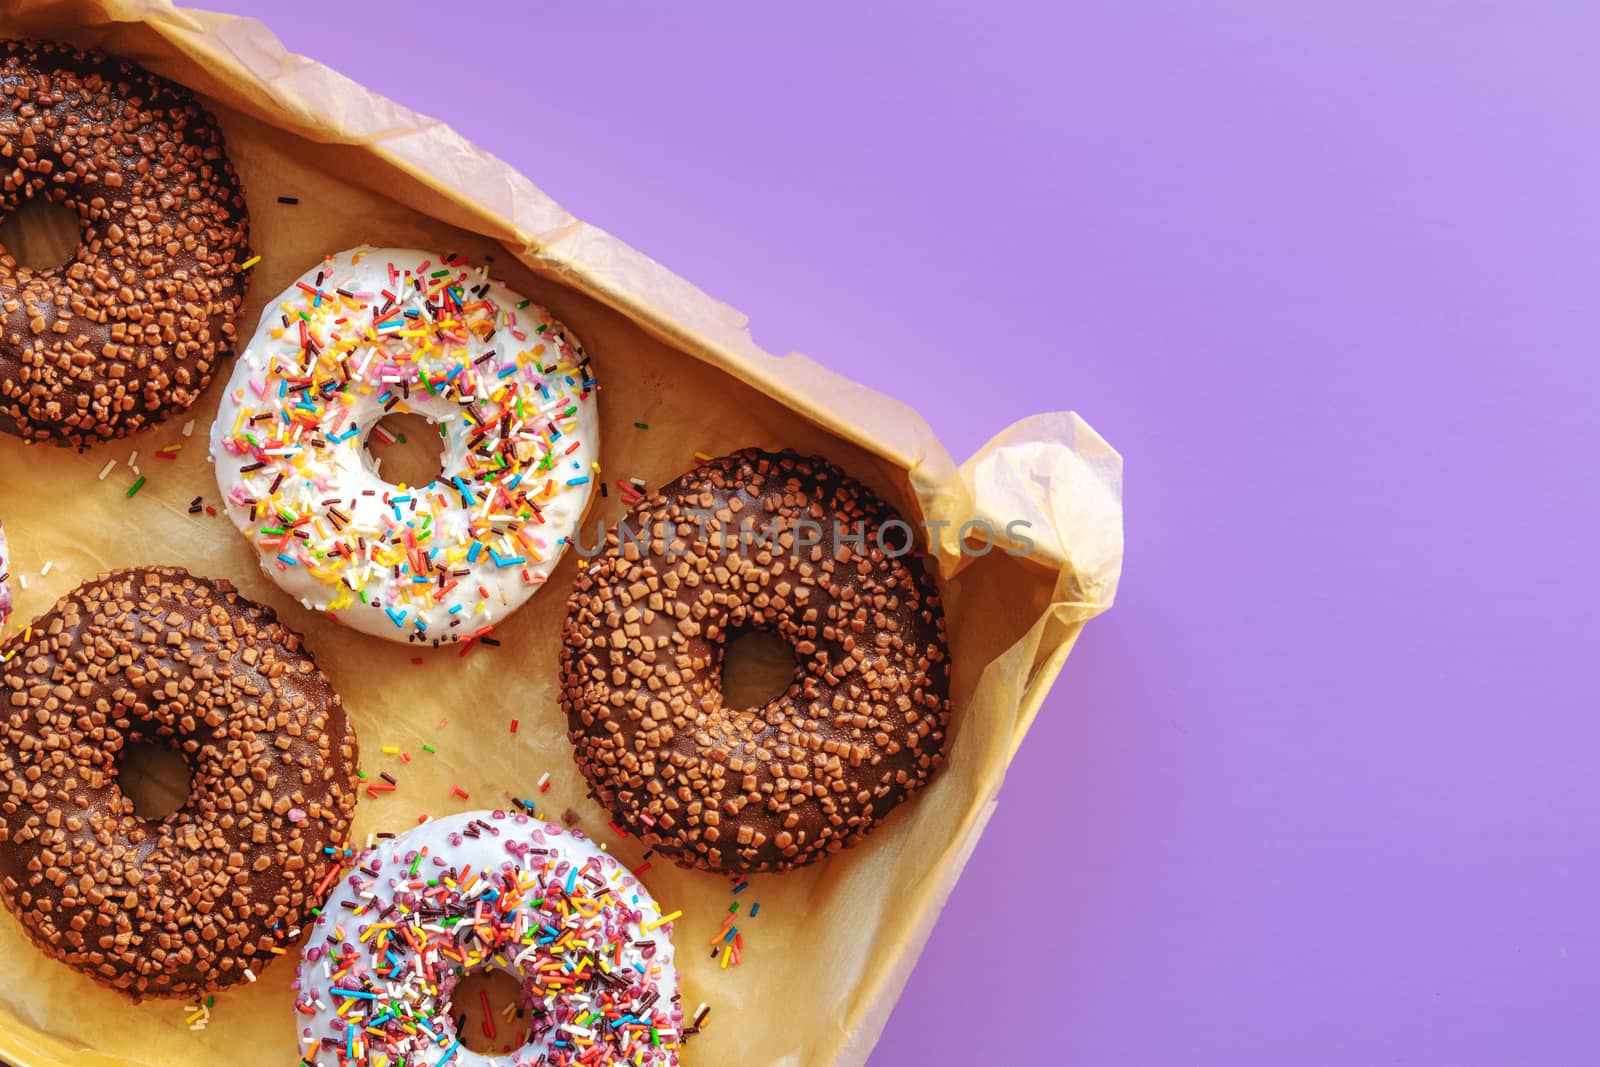 Delicious glazed donuts in box on violet surface. Flat lay minimalist food art background. Top view.